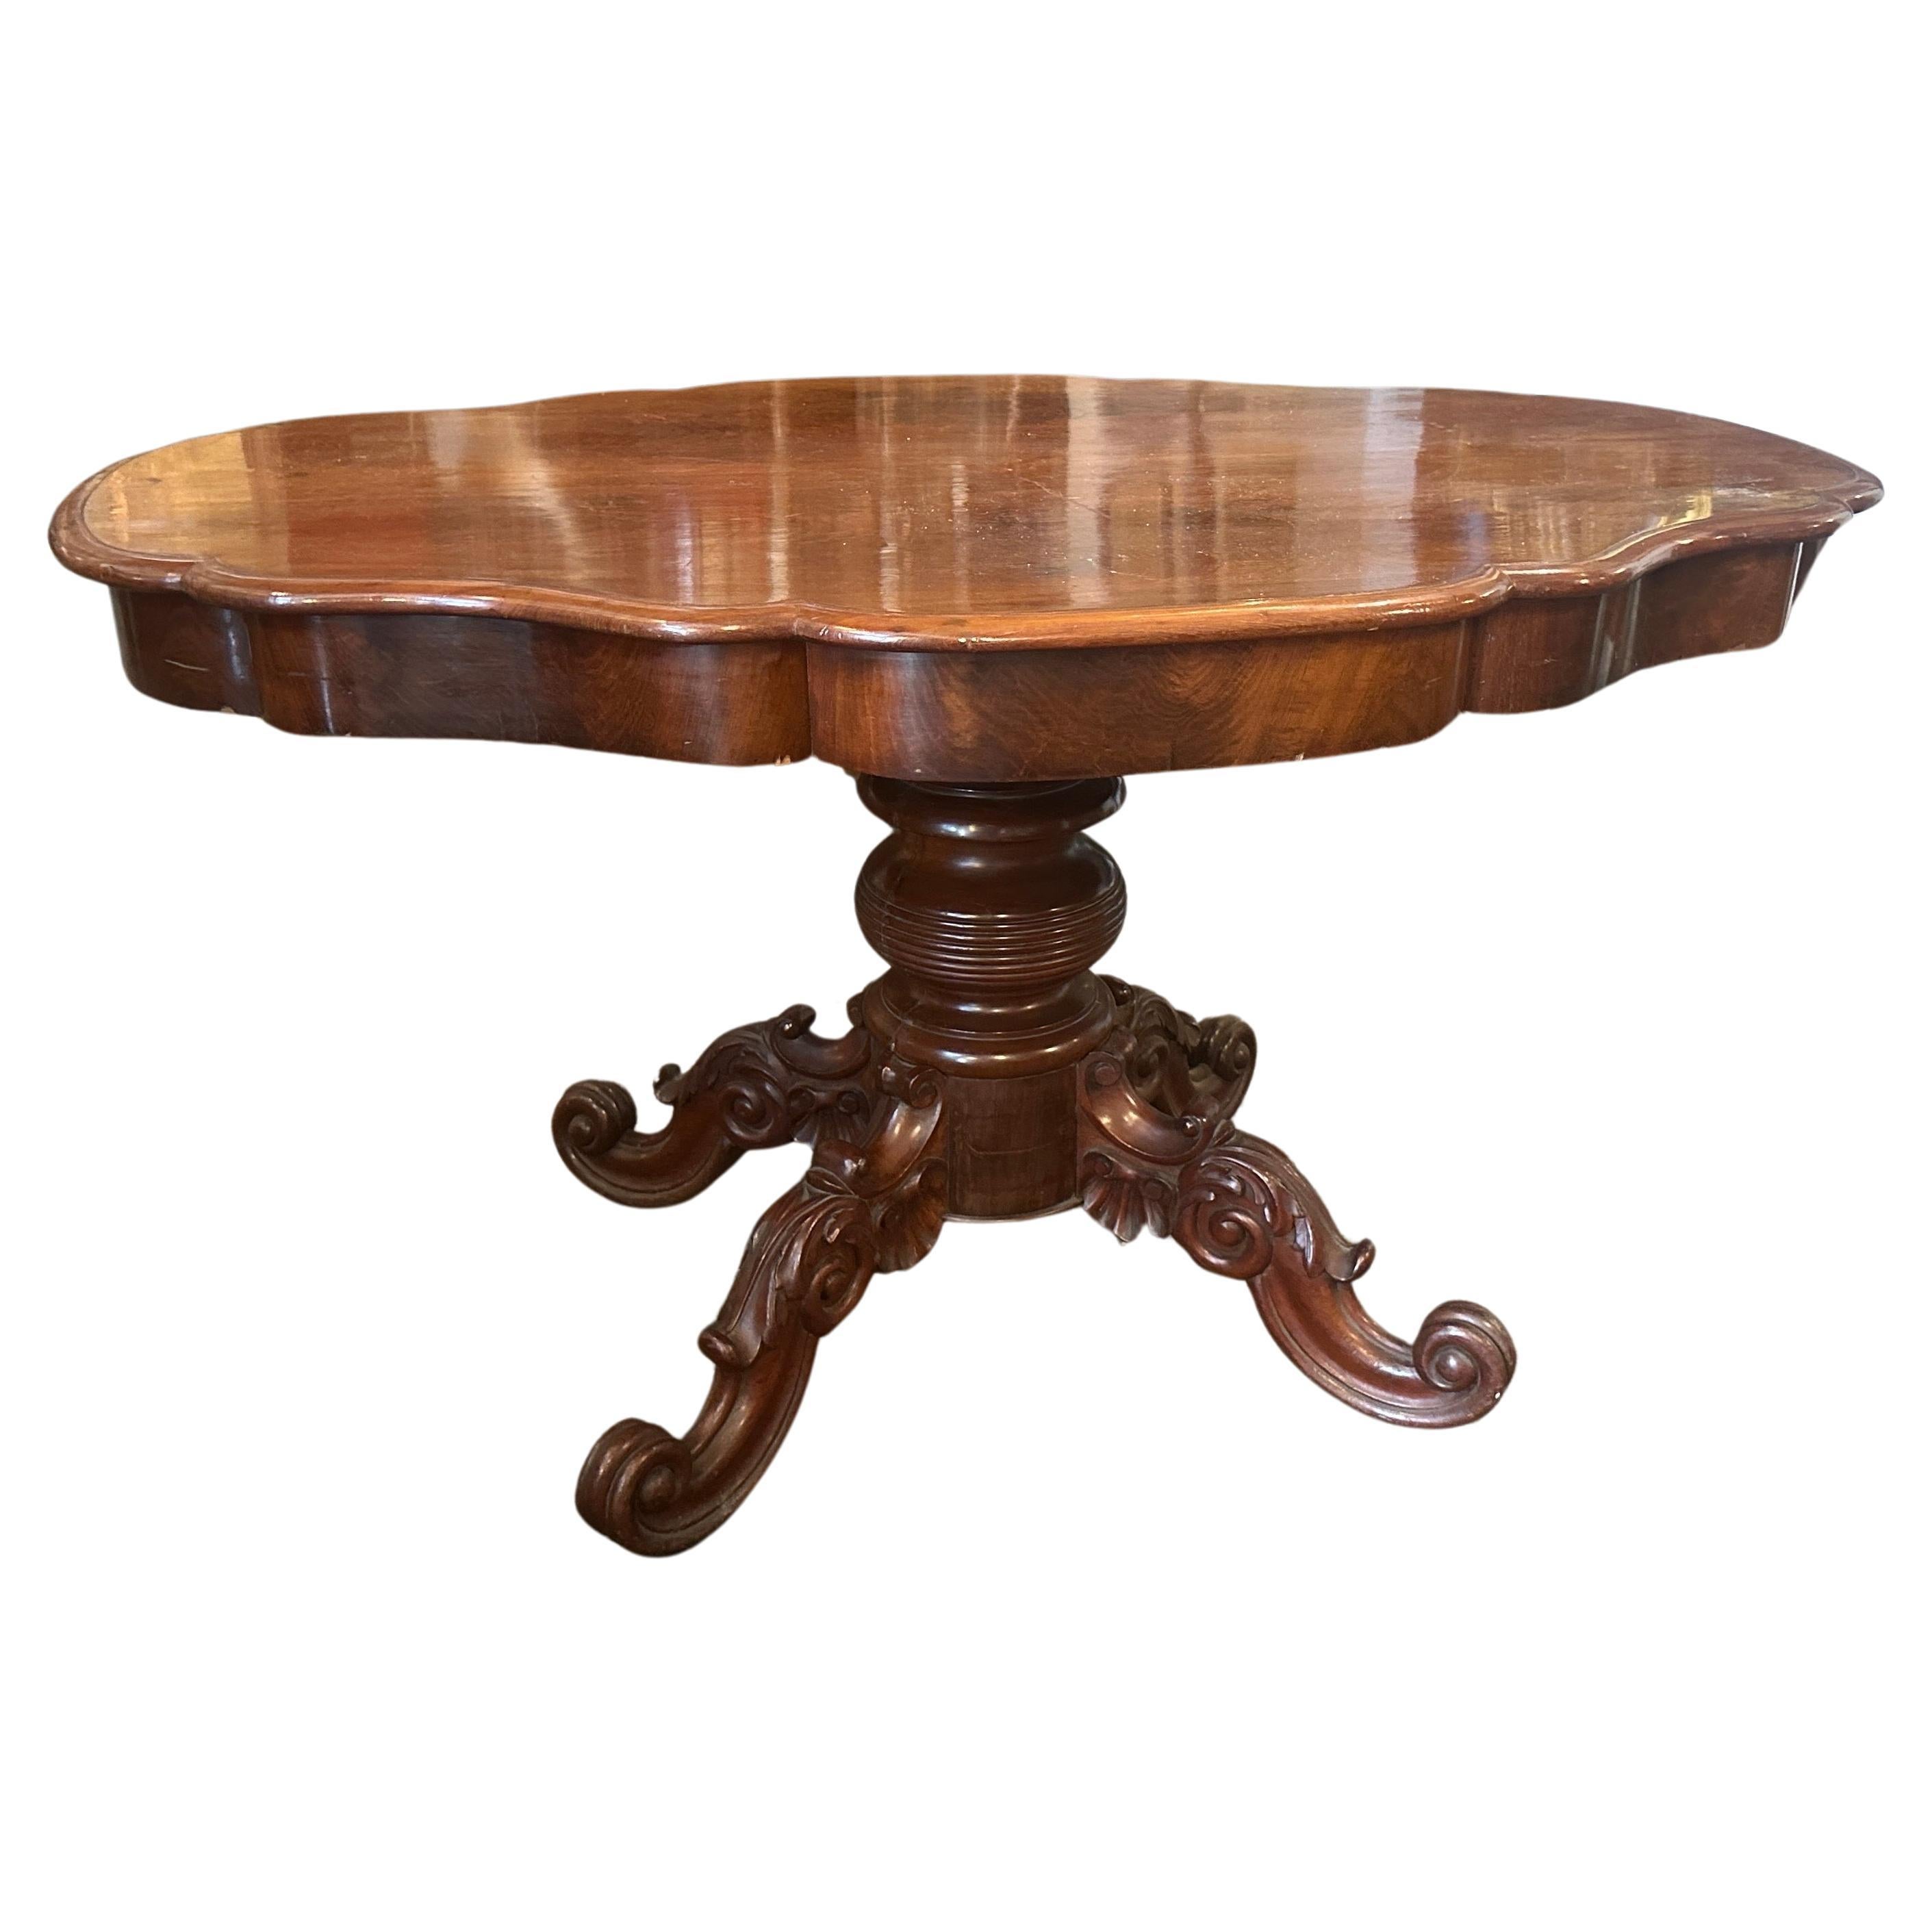 1880s Louis Philippe Mahogany Feather Turtle Shell Shaped Sicilian Side Table